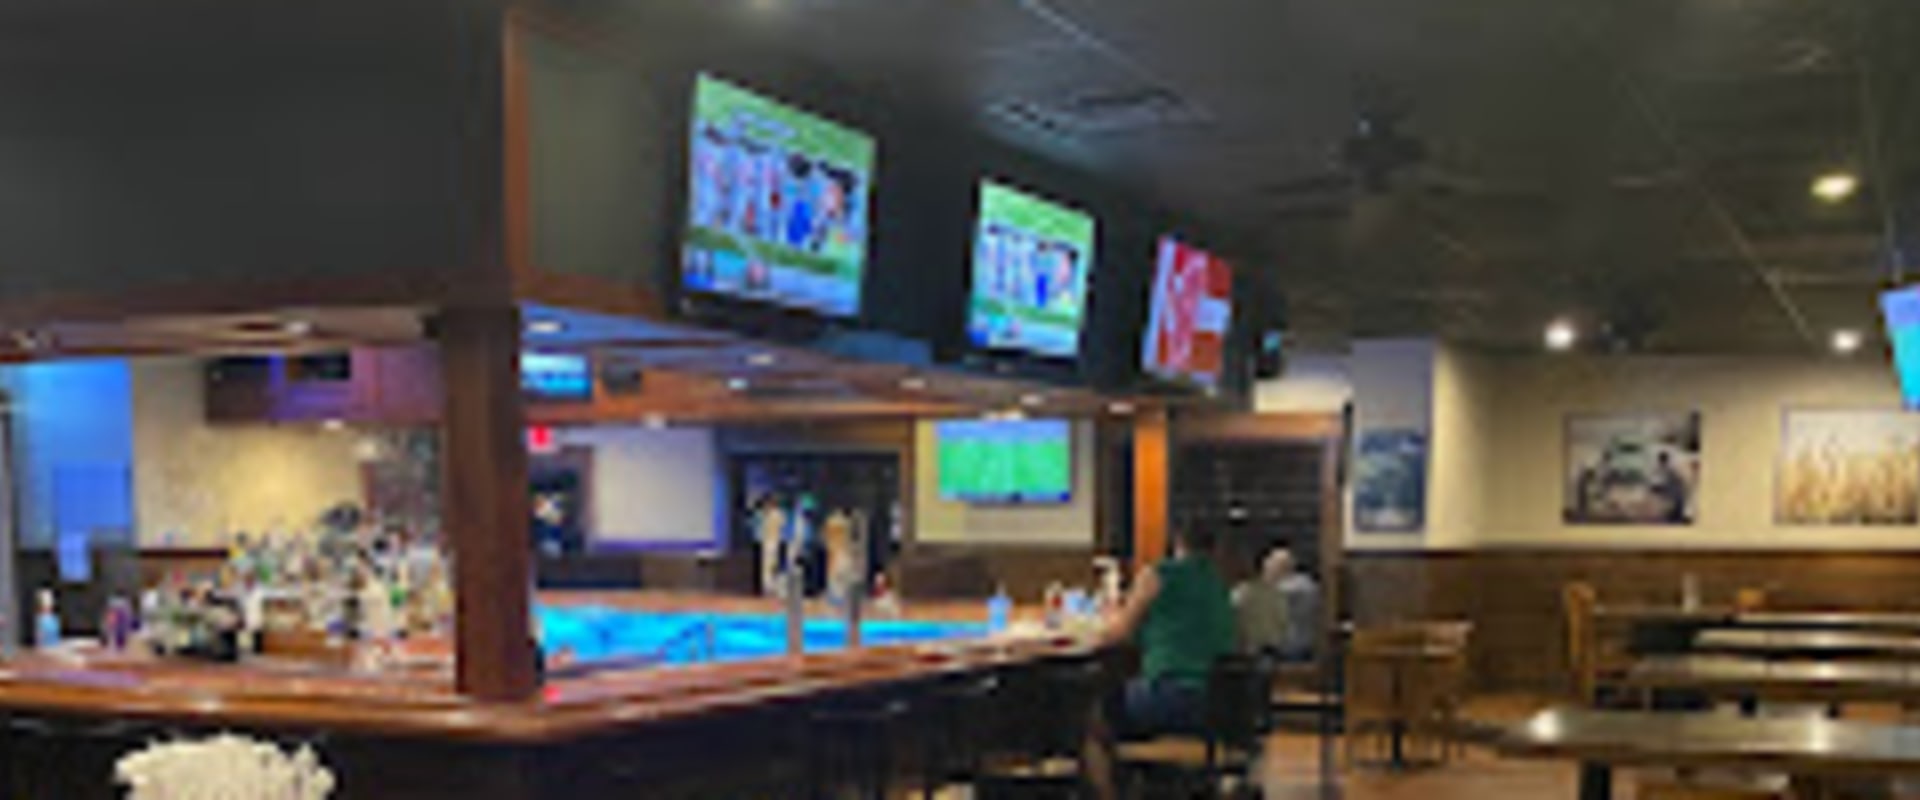 Sports Bars in Summerville SC: Where to Find the Best Sports Venues